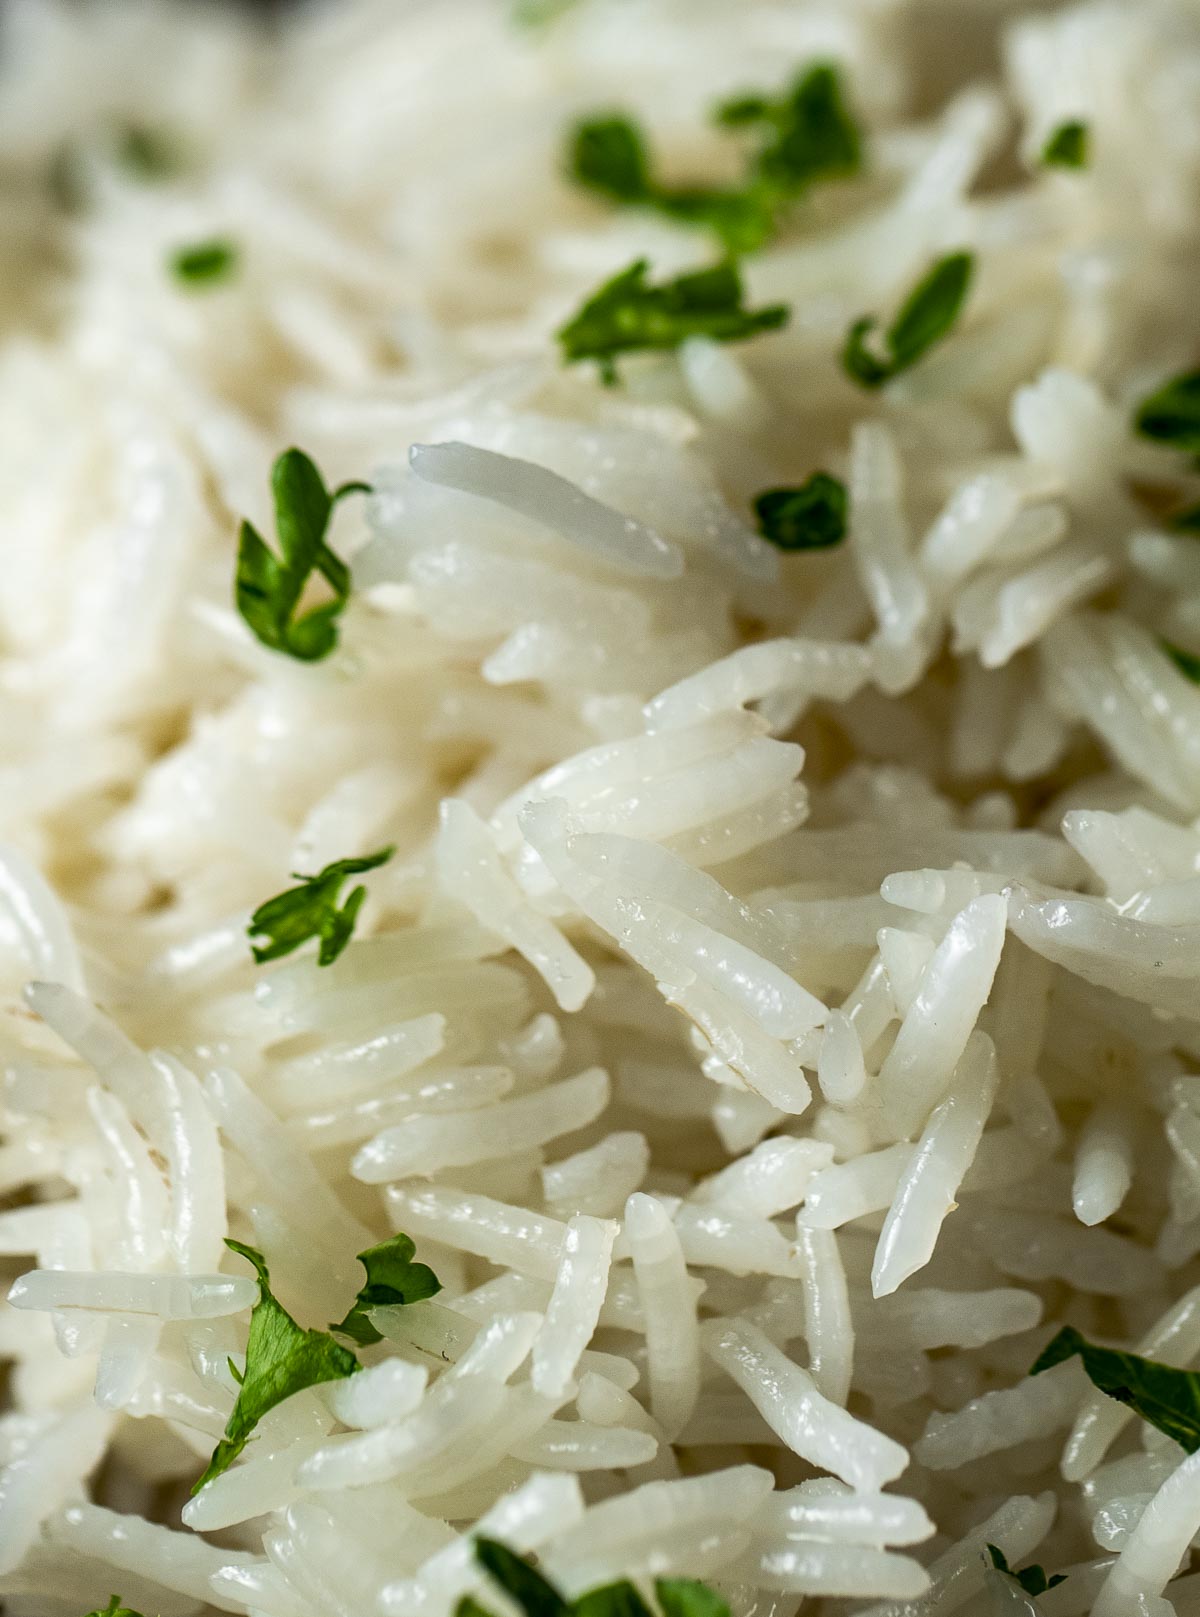 Close up view of cooked grains of basmati rice.